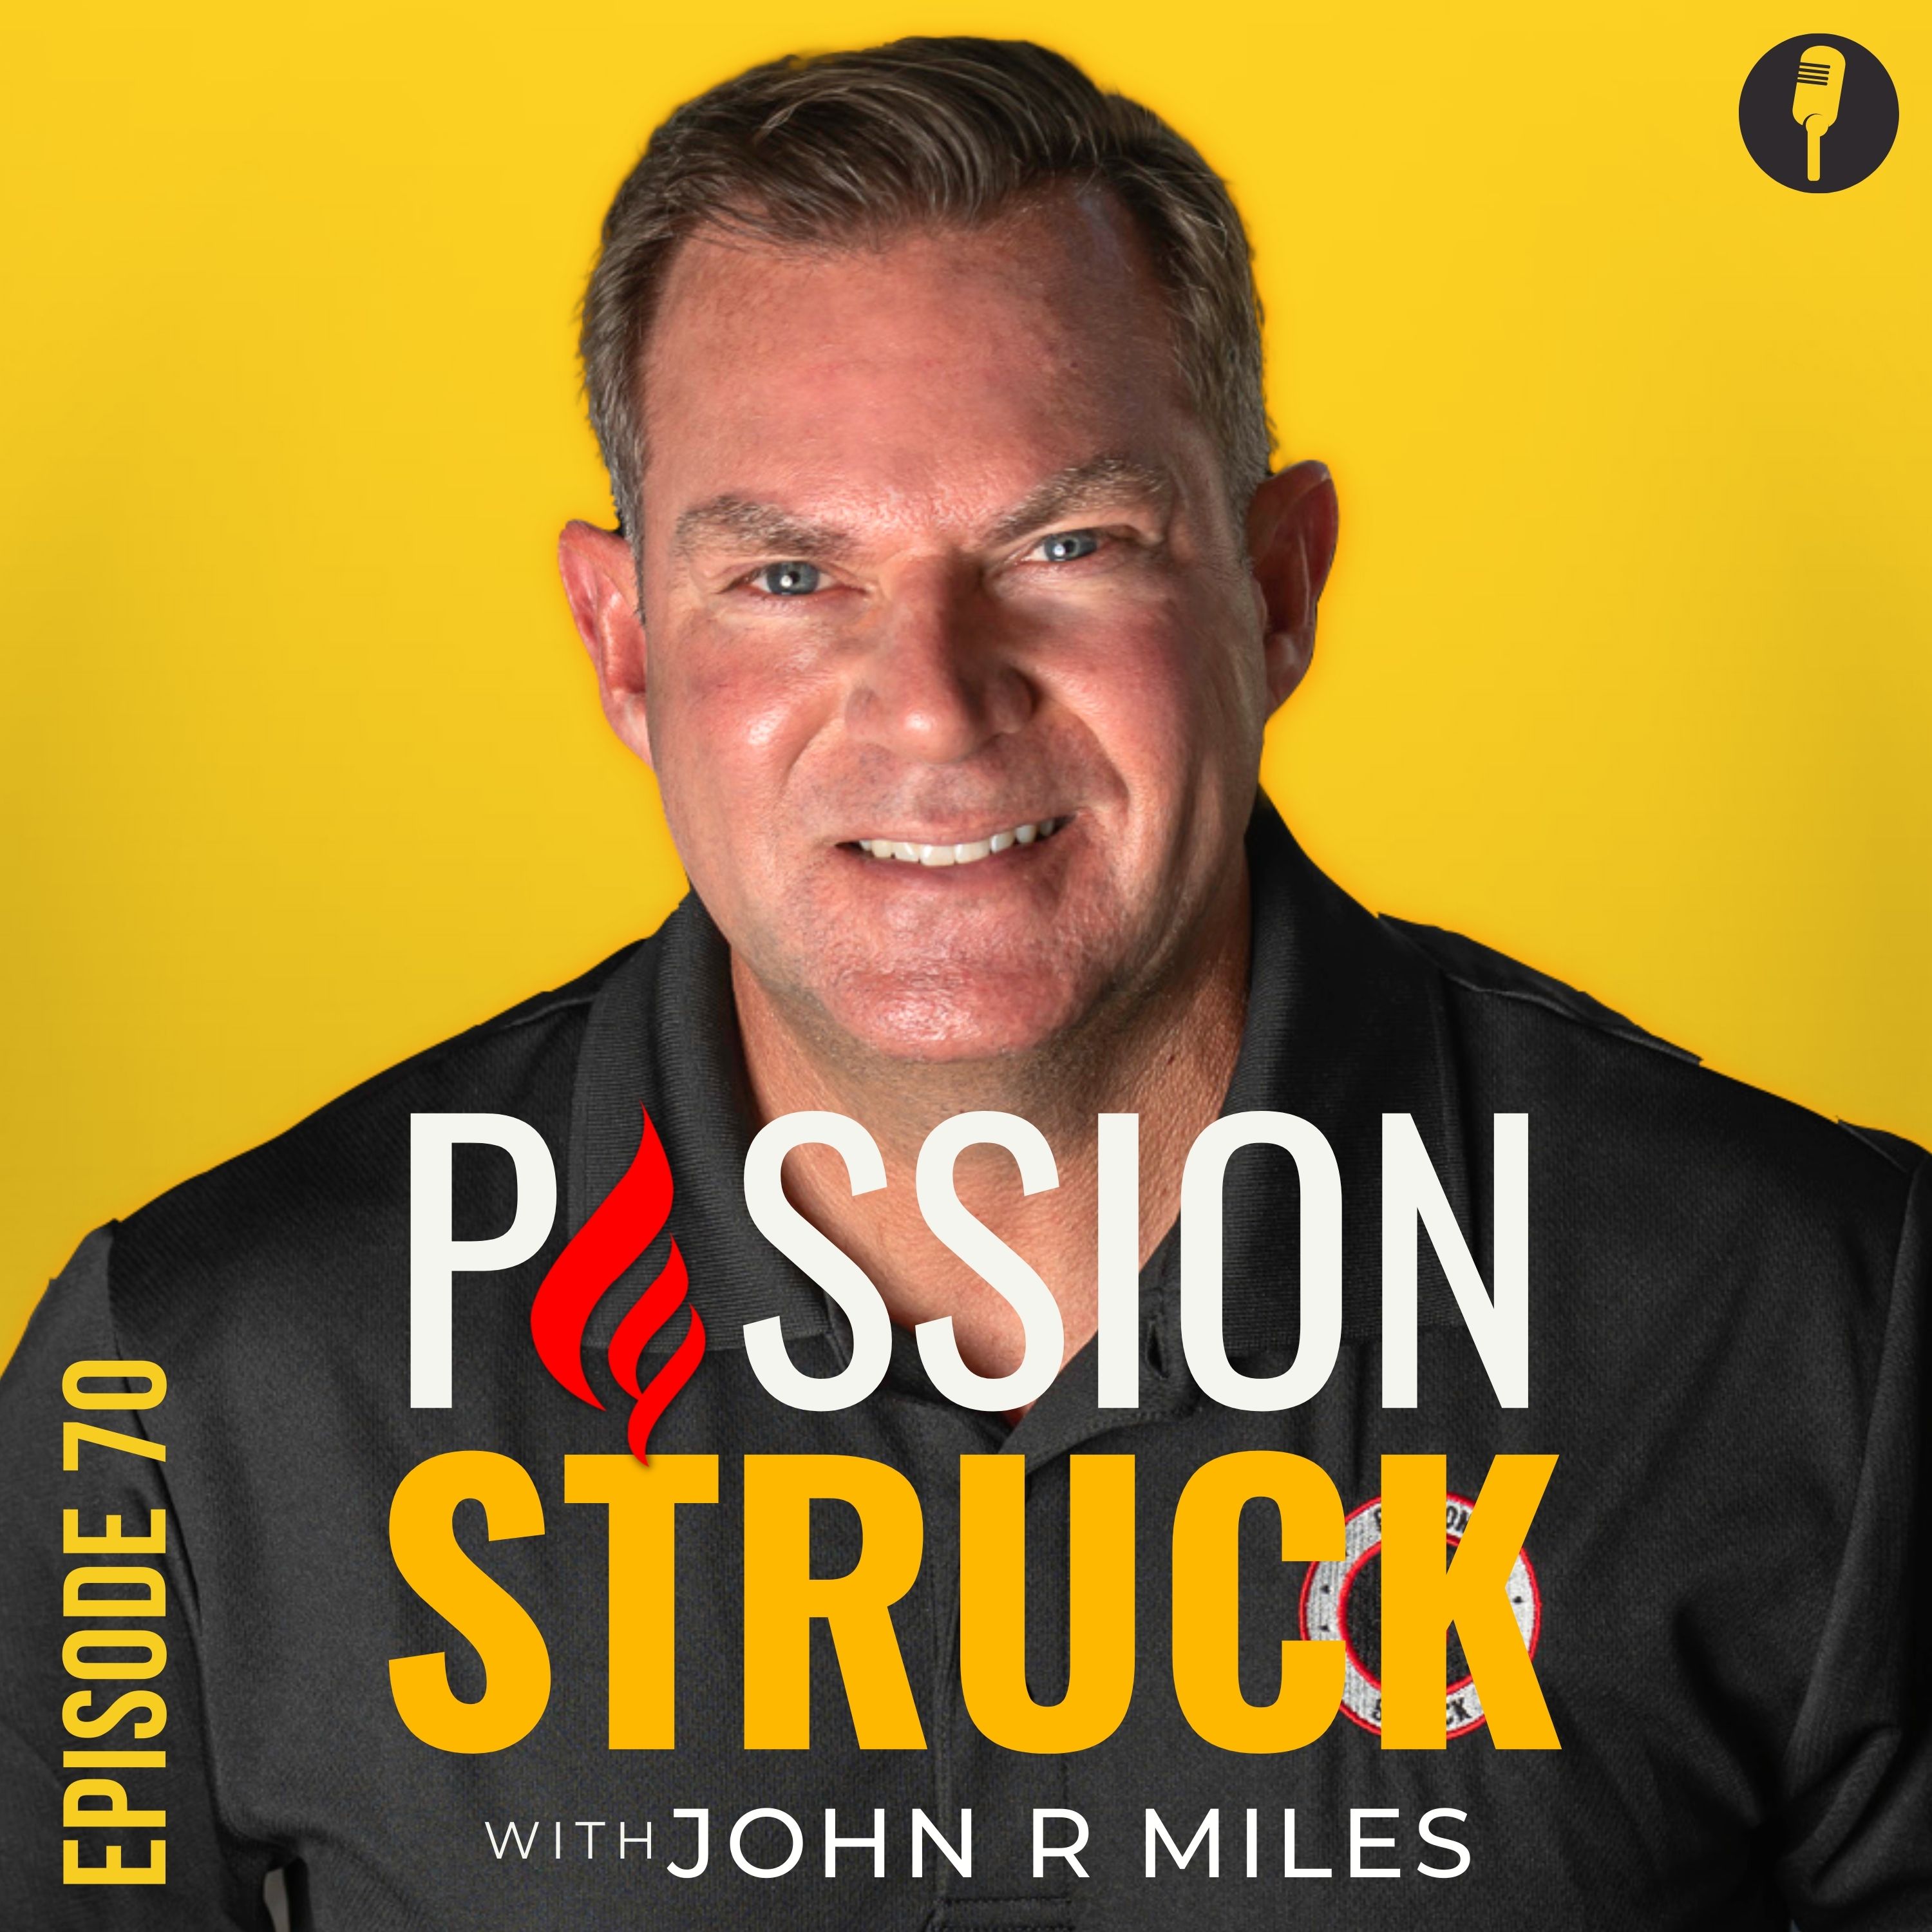 Passion Struck Podcast cover with John R Miles Episode 70